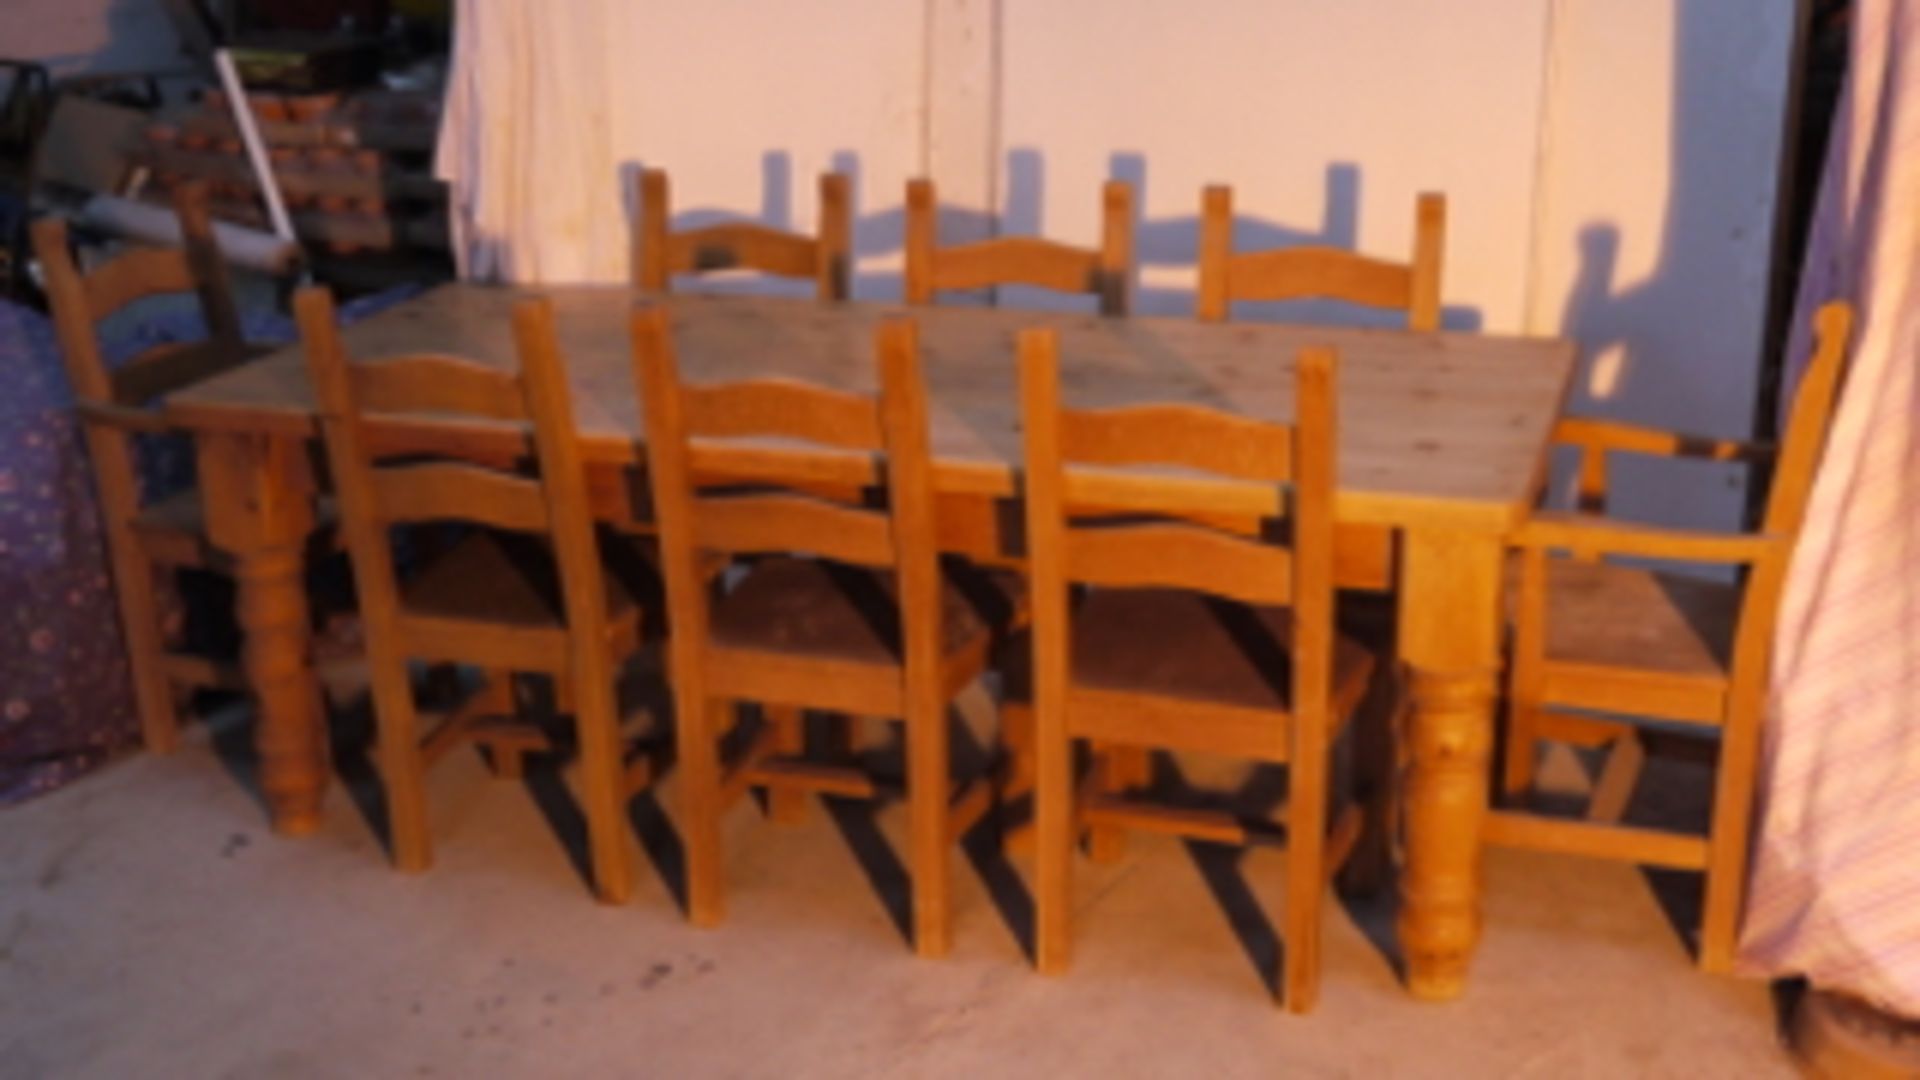 Farm house Table and chairs -  214 wide x 78 high x 91 deep